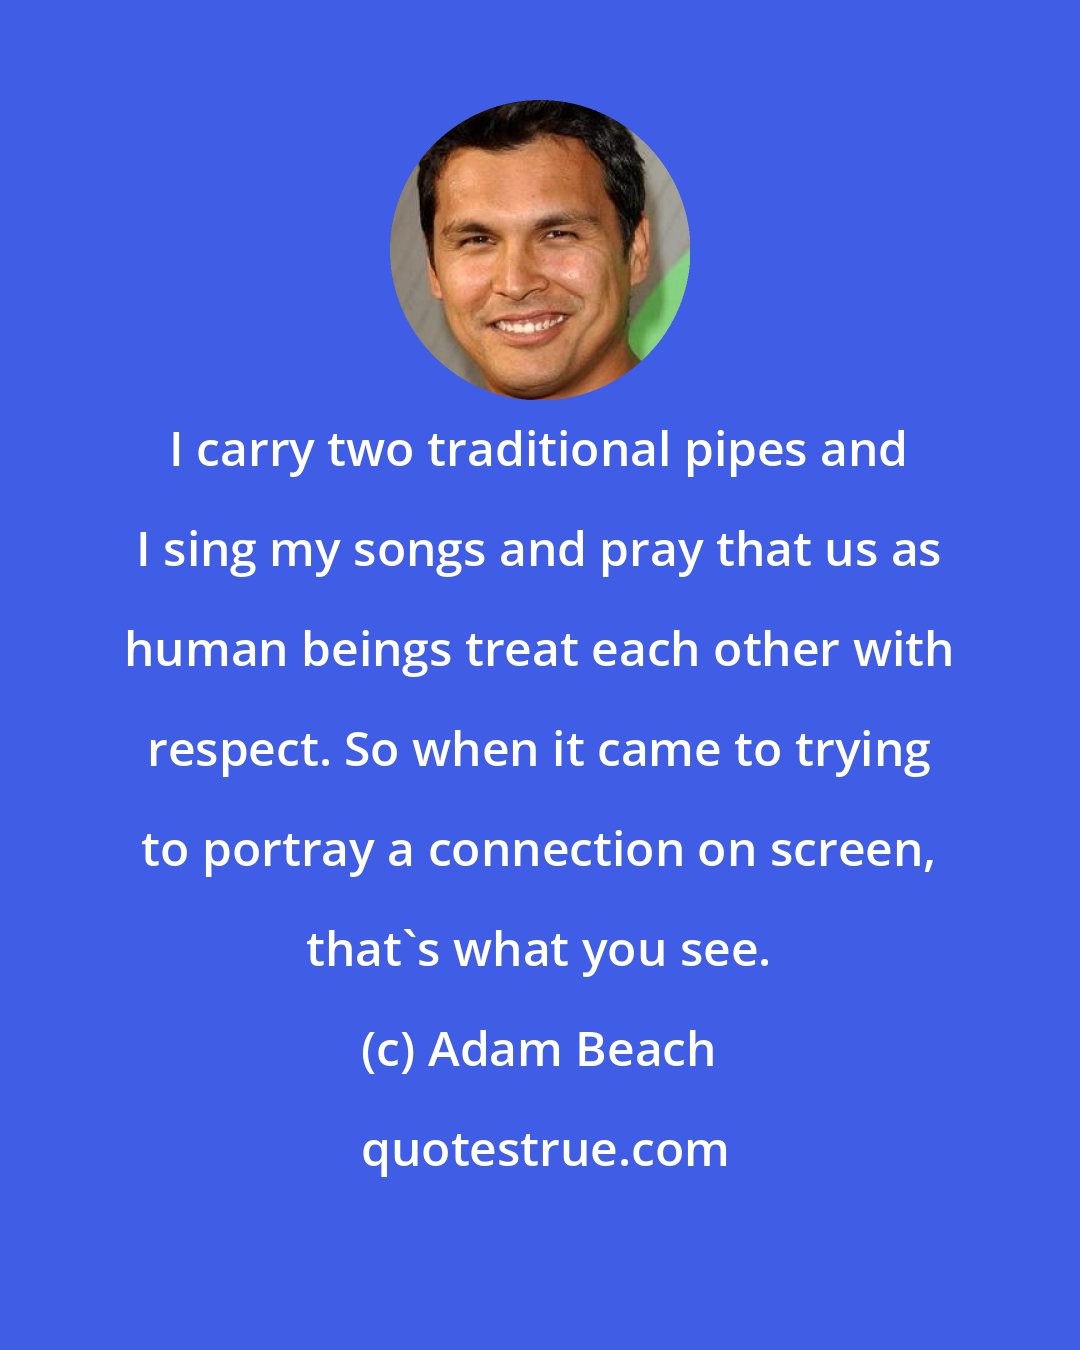 Adam Beach: I carry two traditional pipes and I sing my songs and pray that us as human beings treat each other with respect. So when it came to trying to portray a connection on screen, that's what you see.